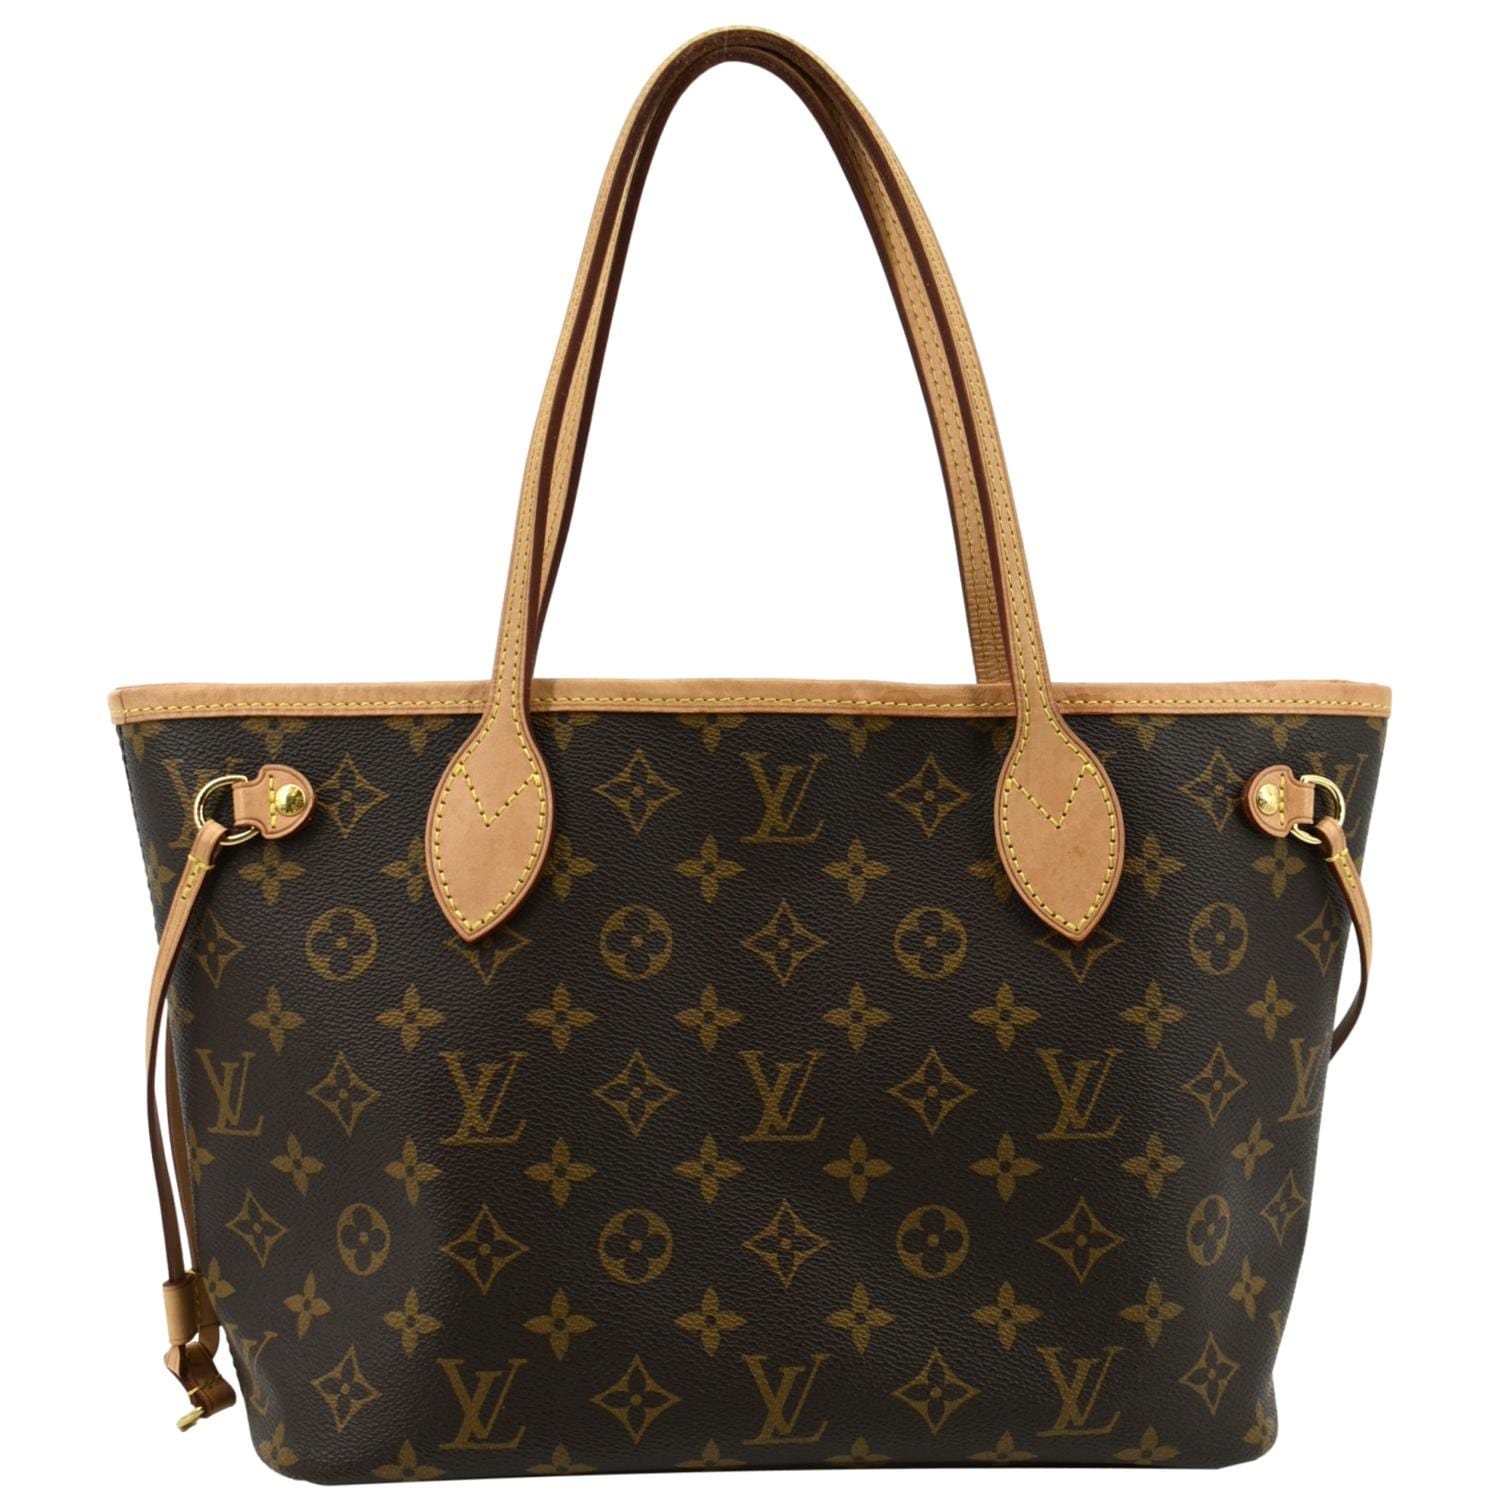 A Bag That's Never Full. The Louis Vuitton Neverfull - The Lux Portal